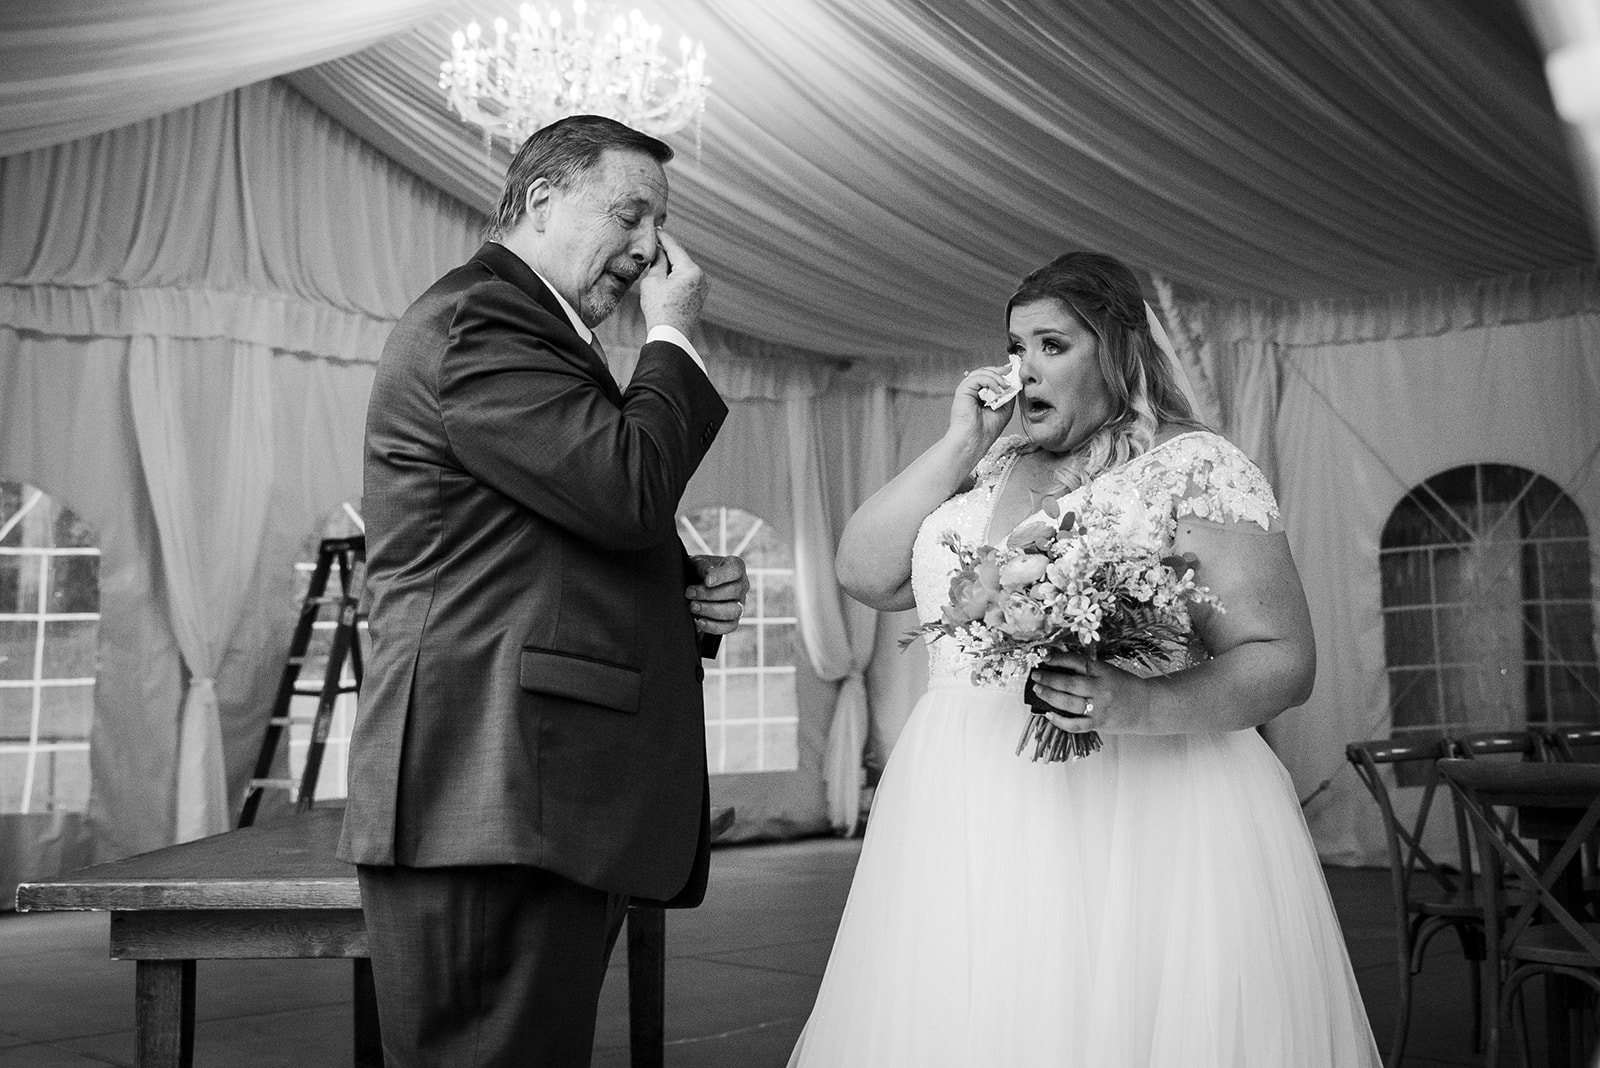 The bride and her father wipe tears from their eyes after sharing a first look on her wedding day.